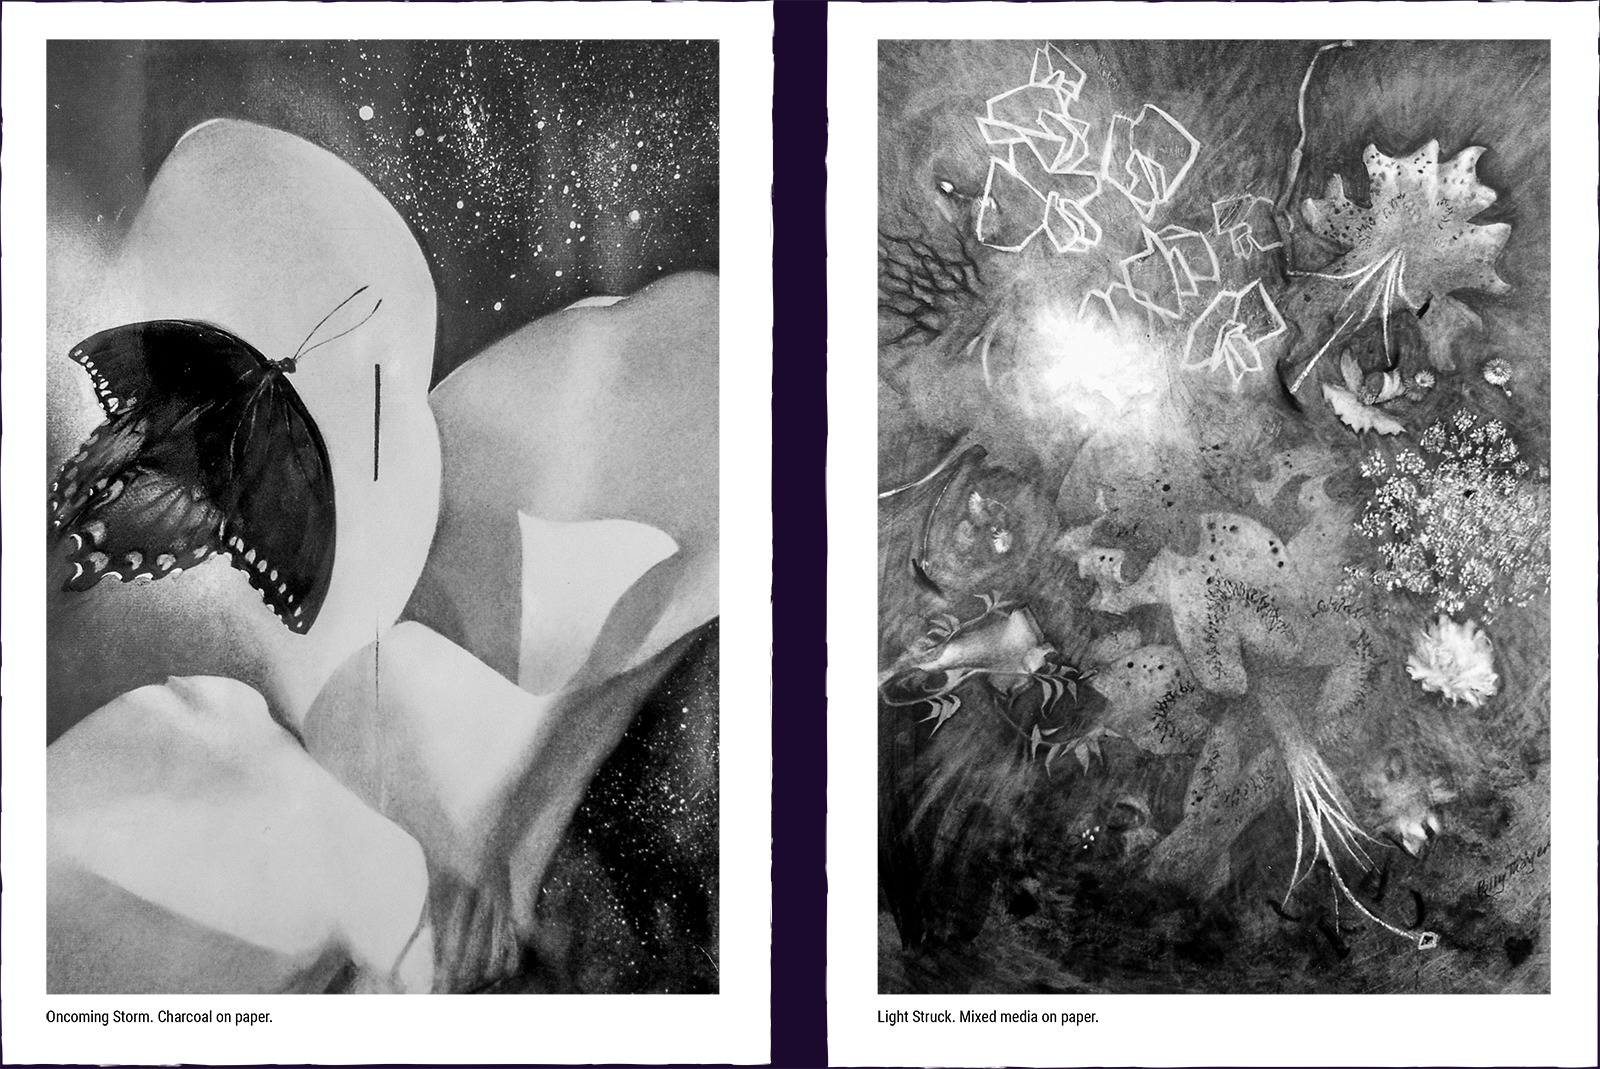 Two mystery paintings. (1) Oncoming Storm. Charcoal on paper. (2) Light Struck. Mixed media on paper.